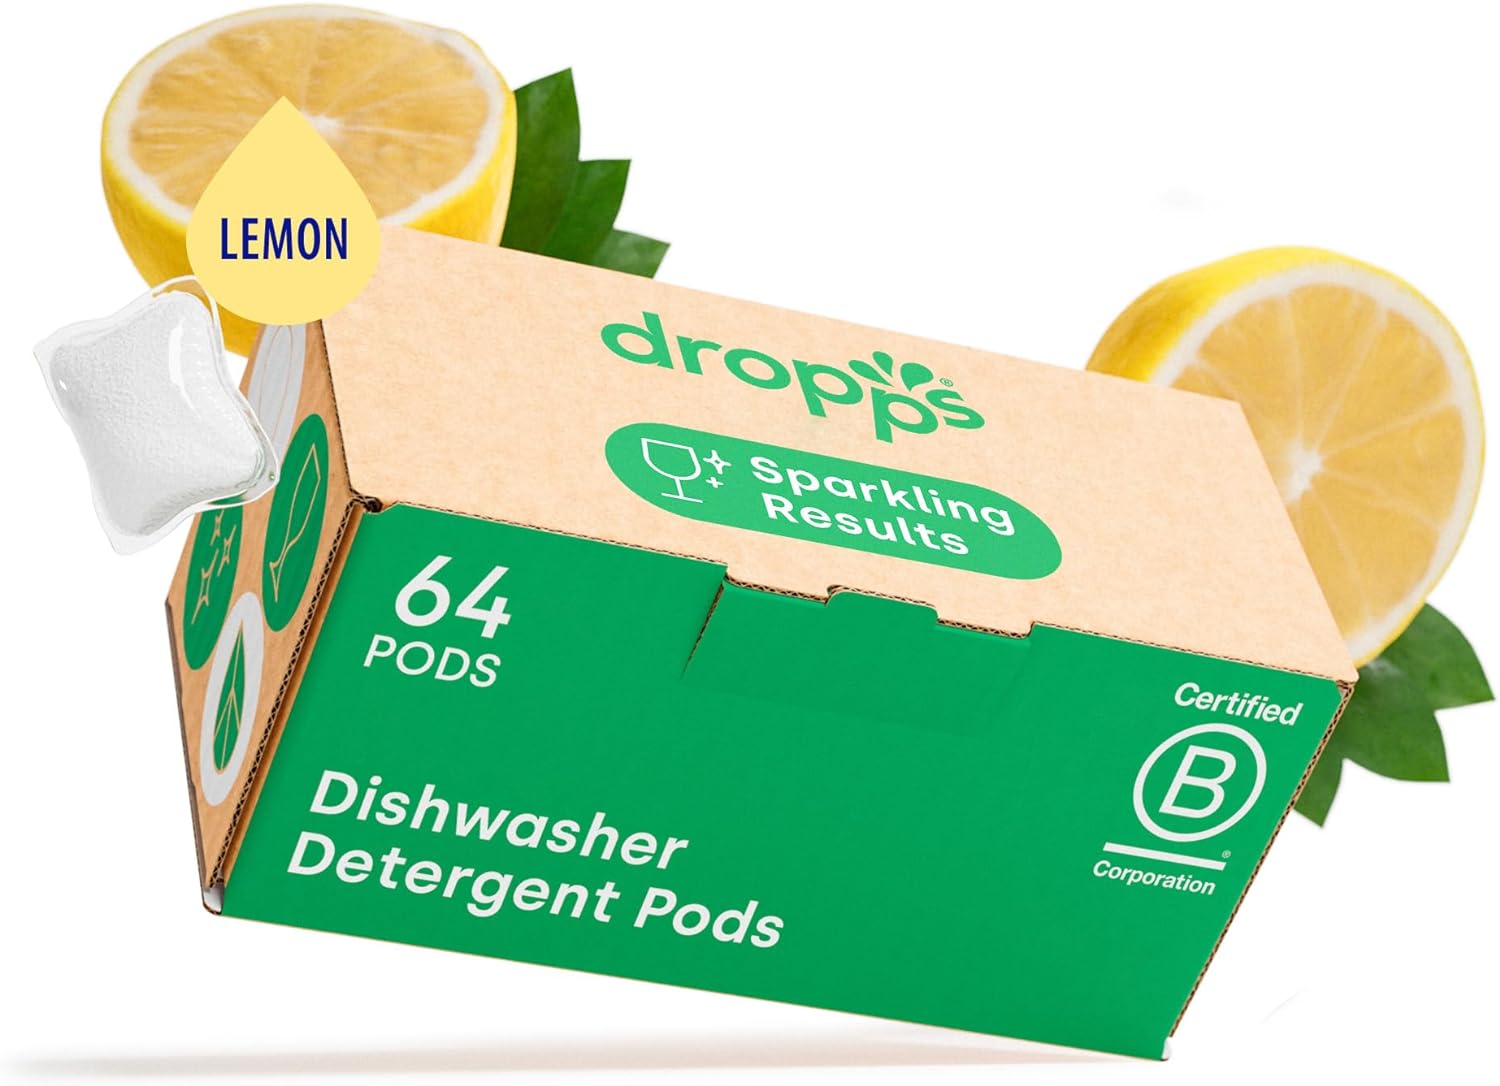 Dropps UltraWash Power Biobased Dishwasher Pods, Lemon Citrus (64 Dish Tabs) - Deep Clean Dishwasher Detergent Tablets for Sparkling Shiny Dishes - No Rinse Aid or Pre-Wash Needed